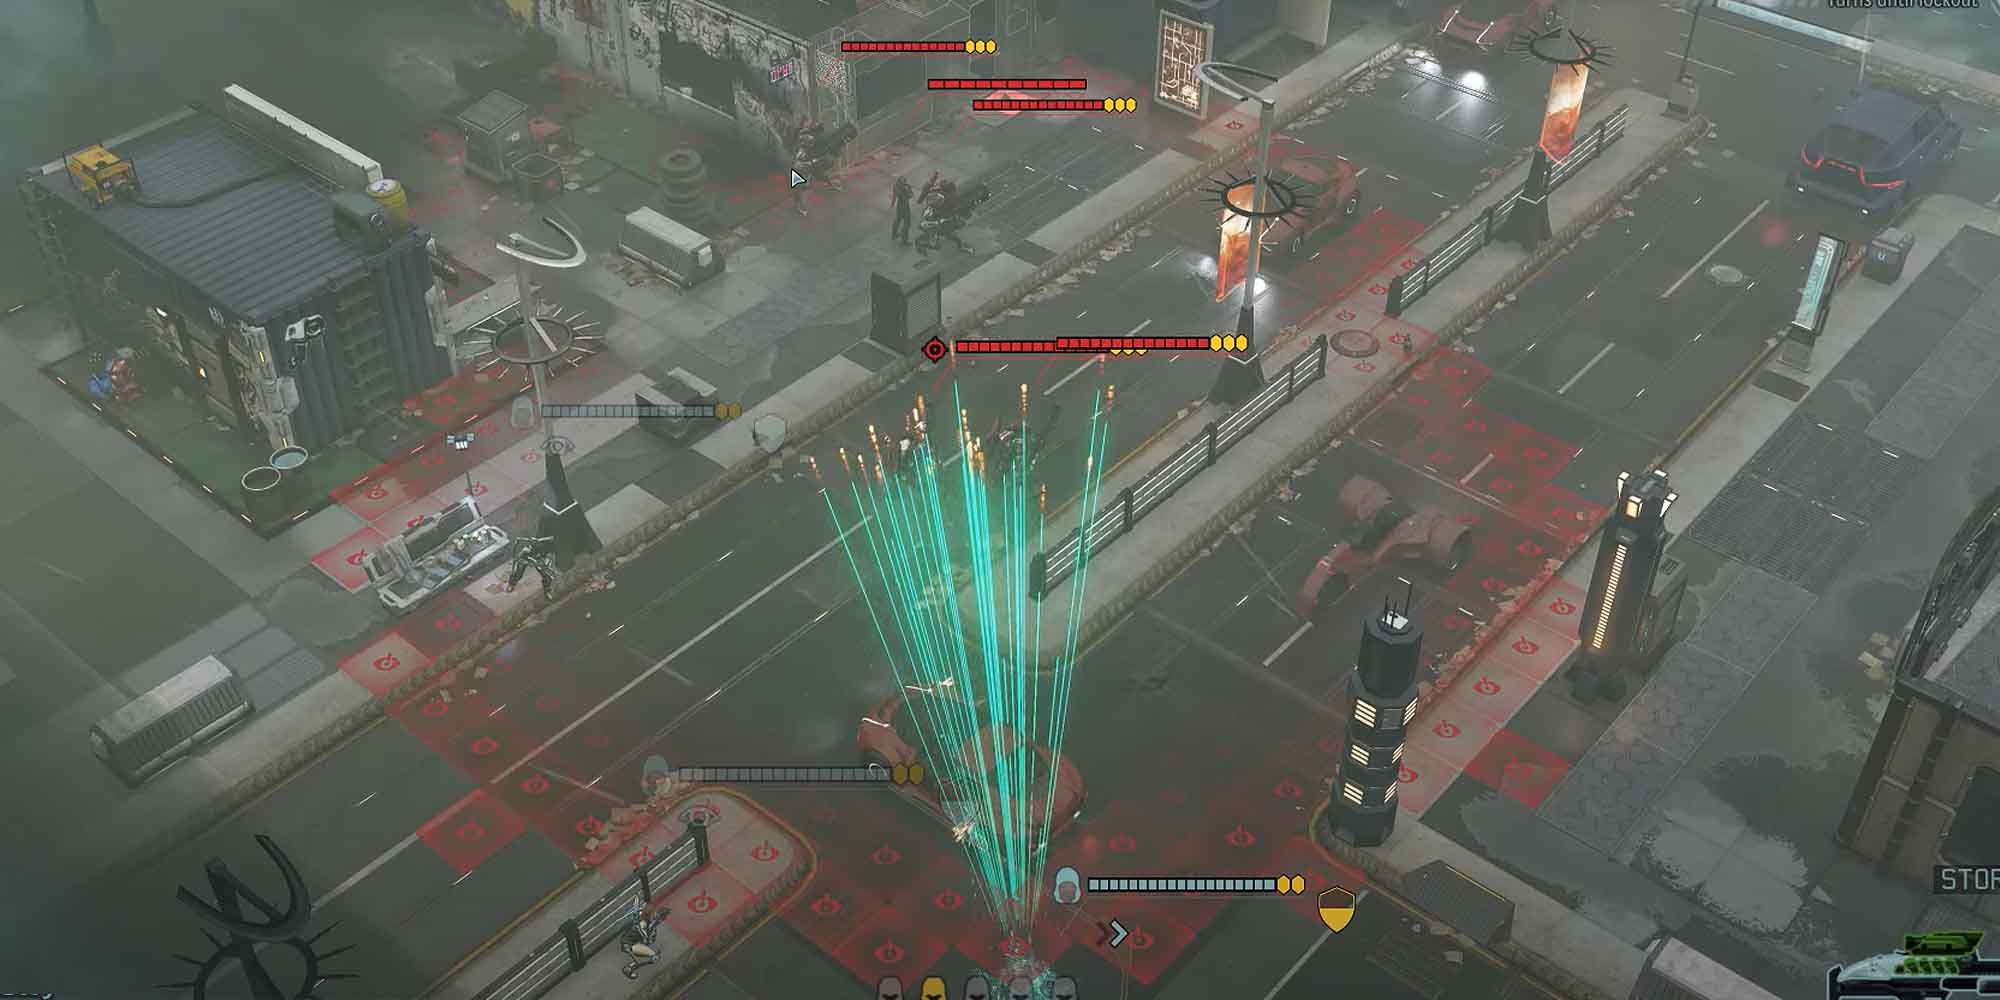 Firing the Shredstorm Cannon at a group of enemies in Xcom 2